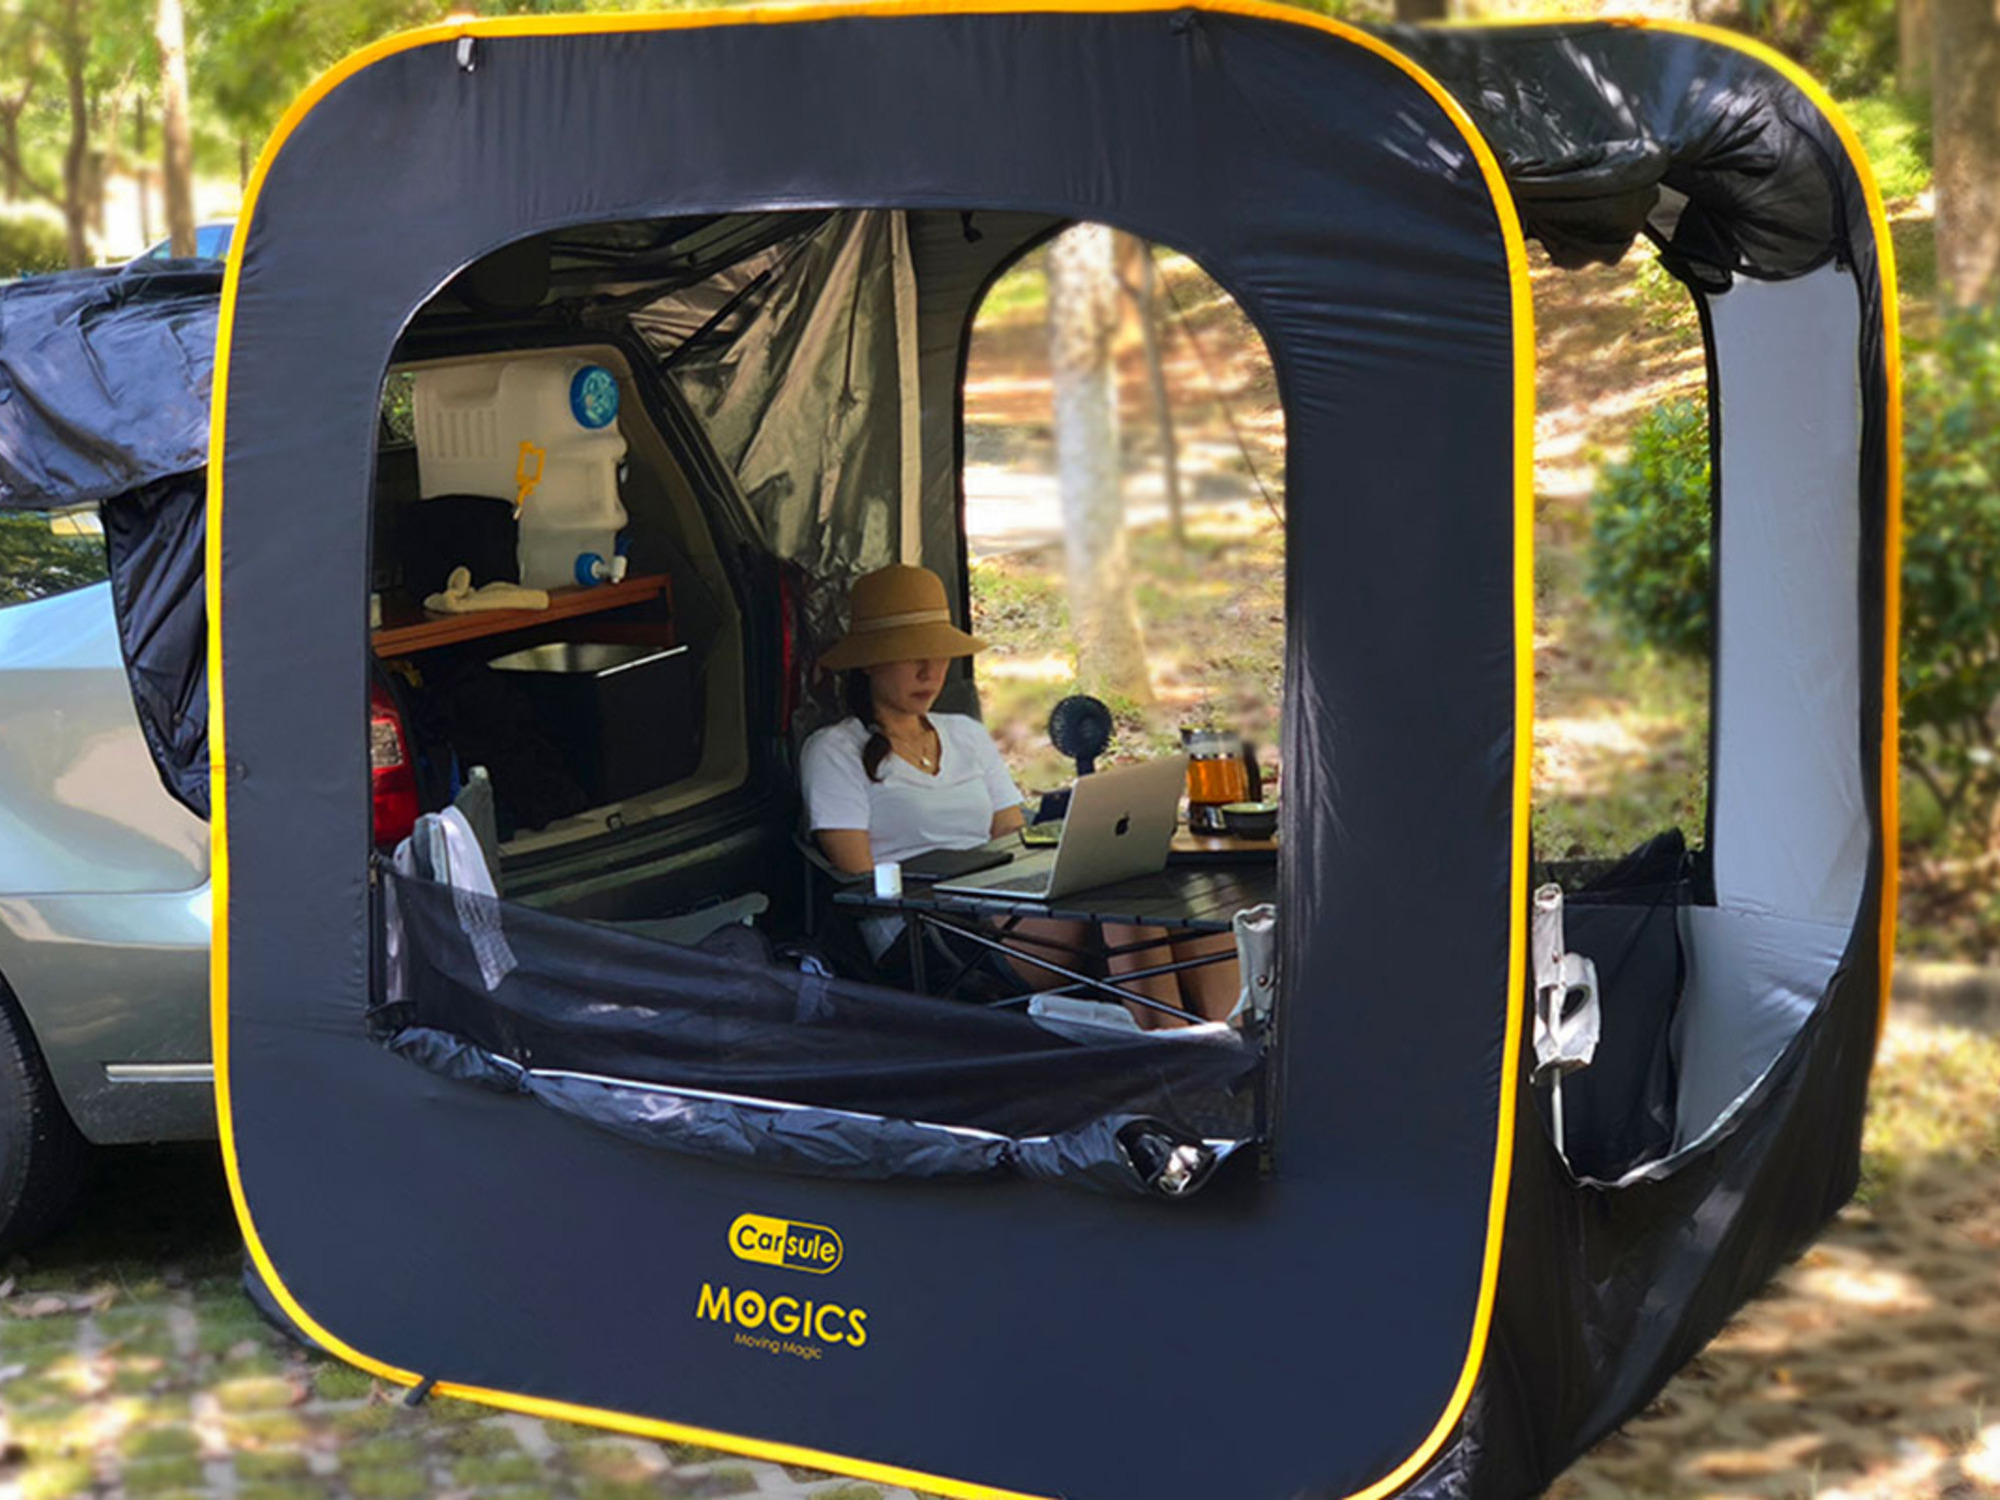 This pop-up car tent takes less than 5 minutes to assemble, and it’s $100 off